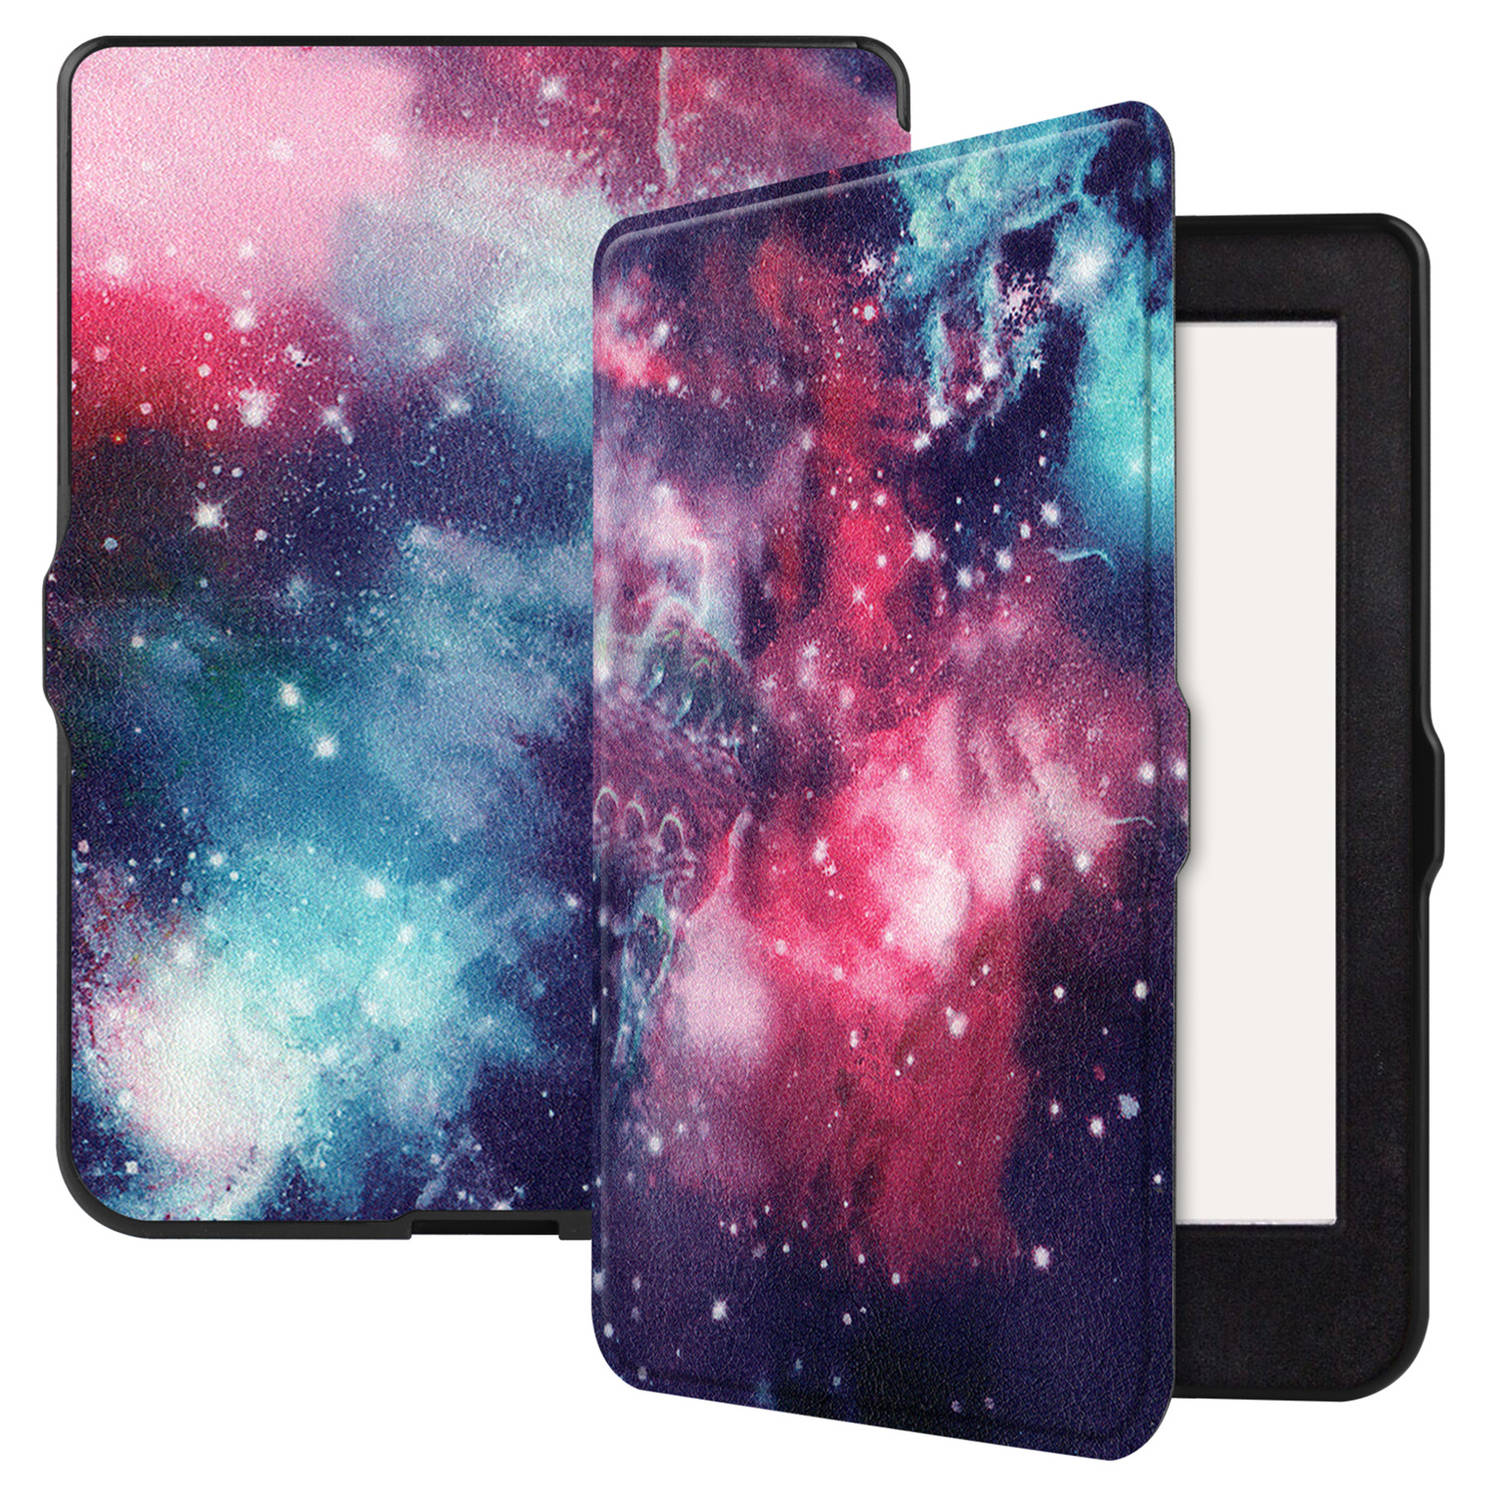 Basey Kobo Nia Hoesje Bookcase Cover Hoes Kobo Nia Case Cover Hoes Galaxy